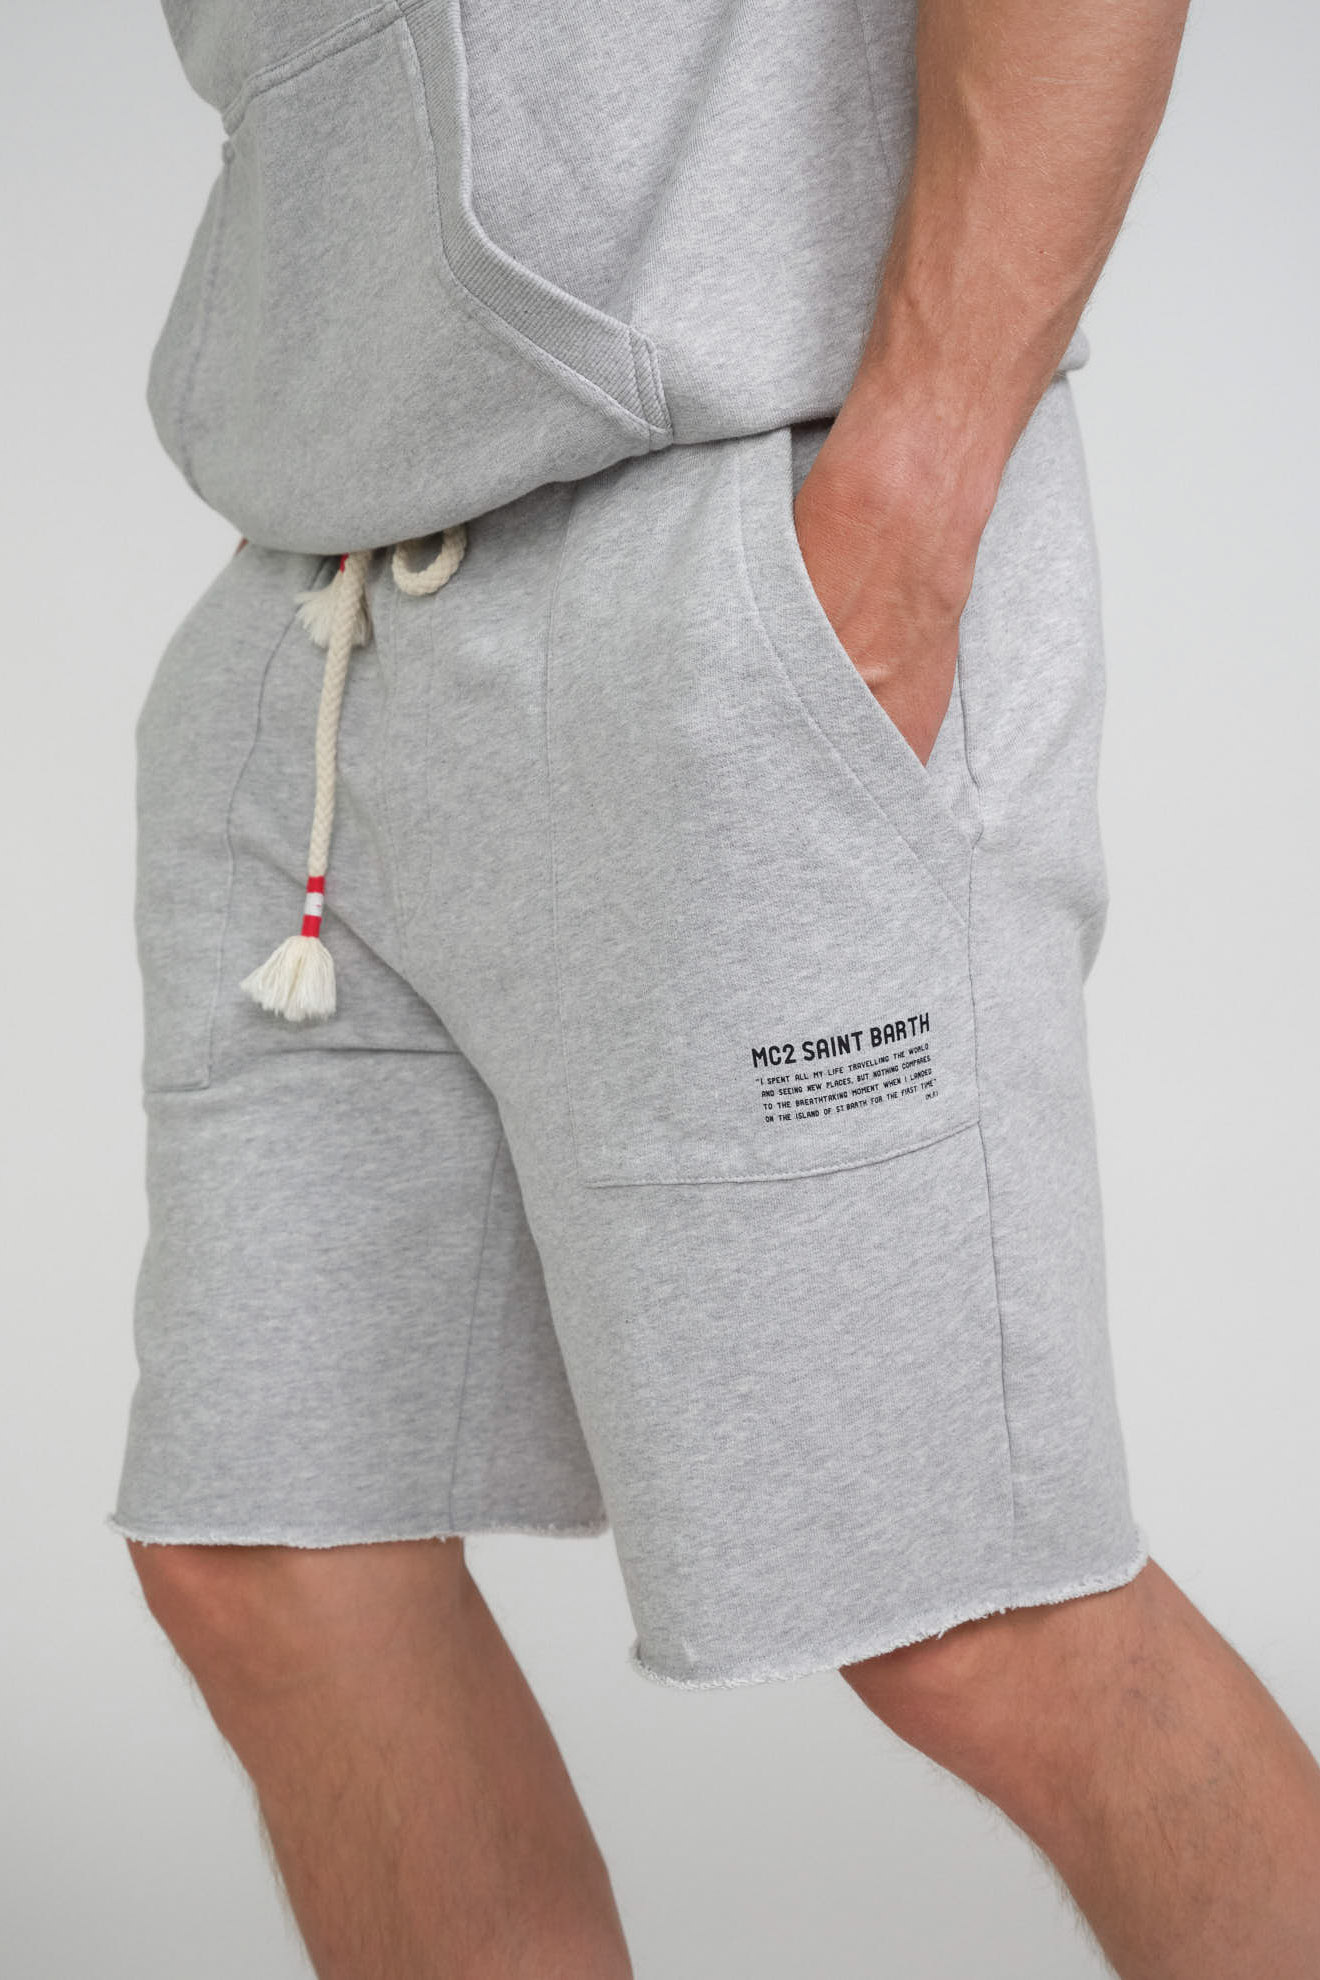 st.barth shorts grey branded cotton model front